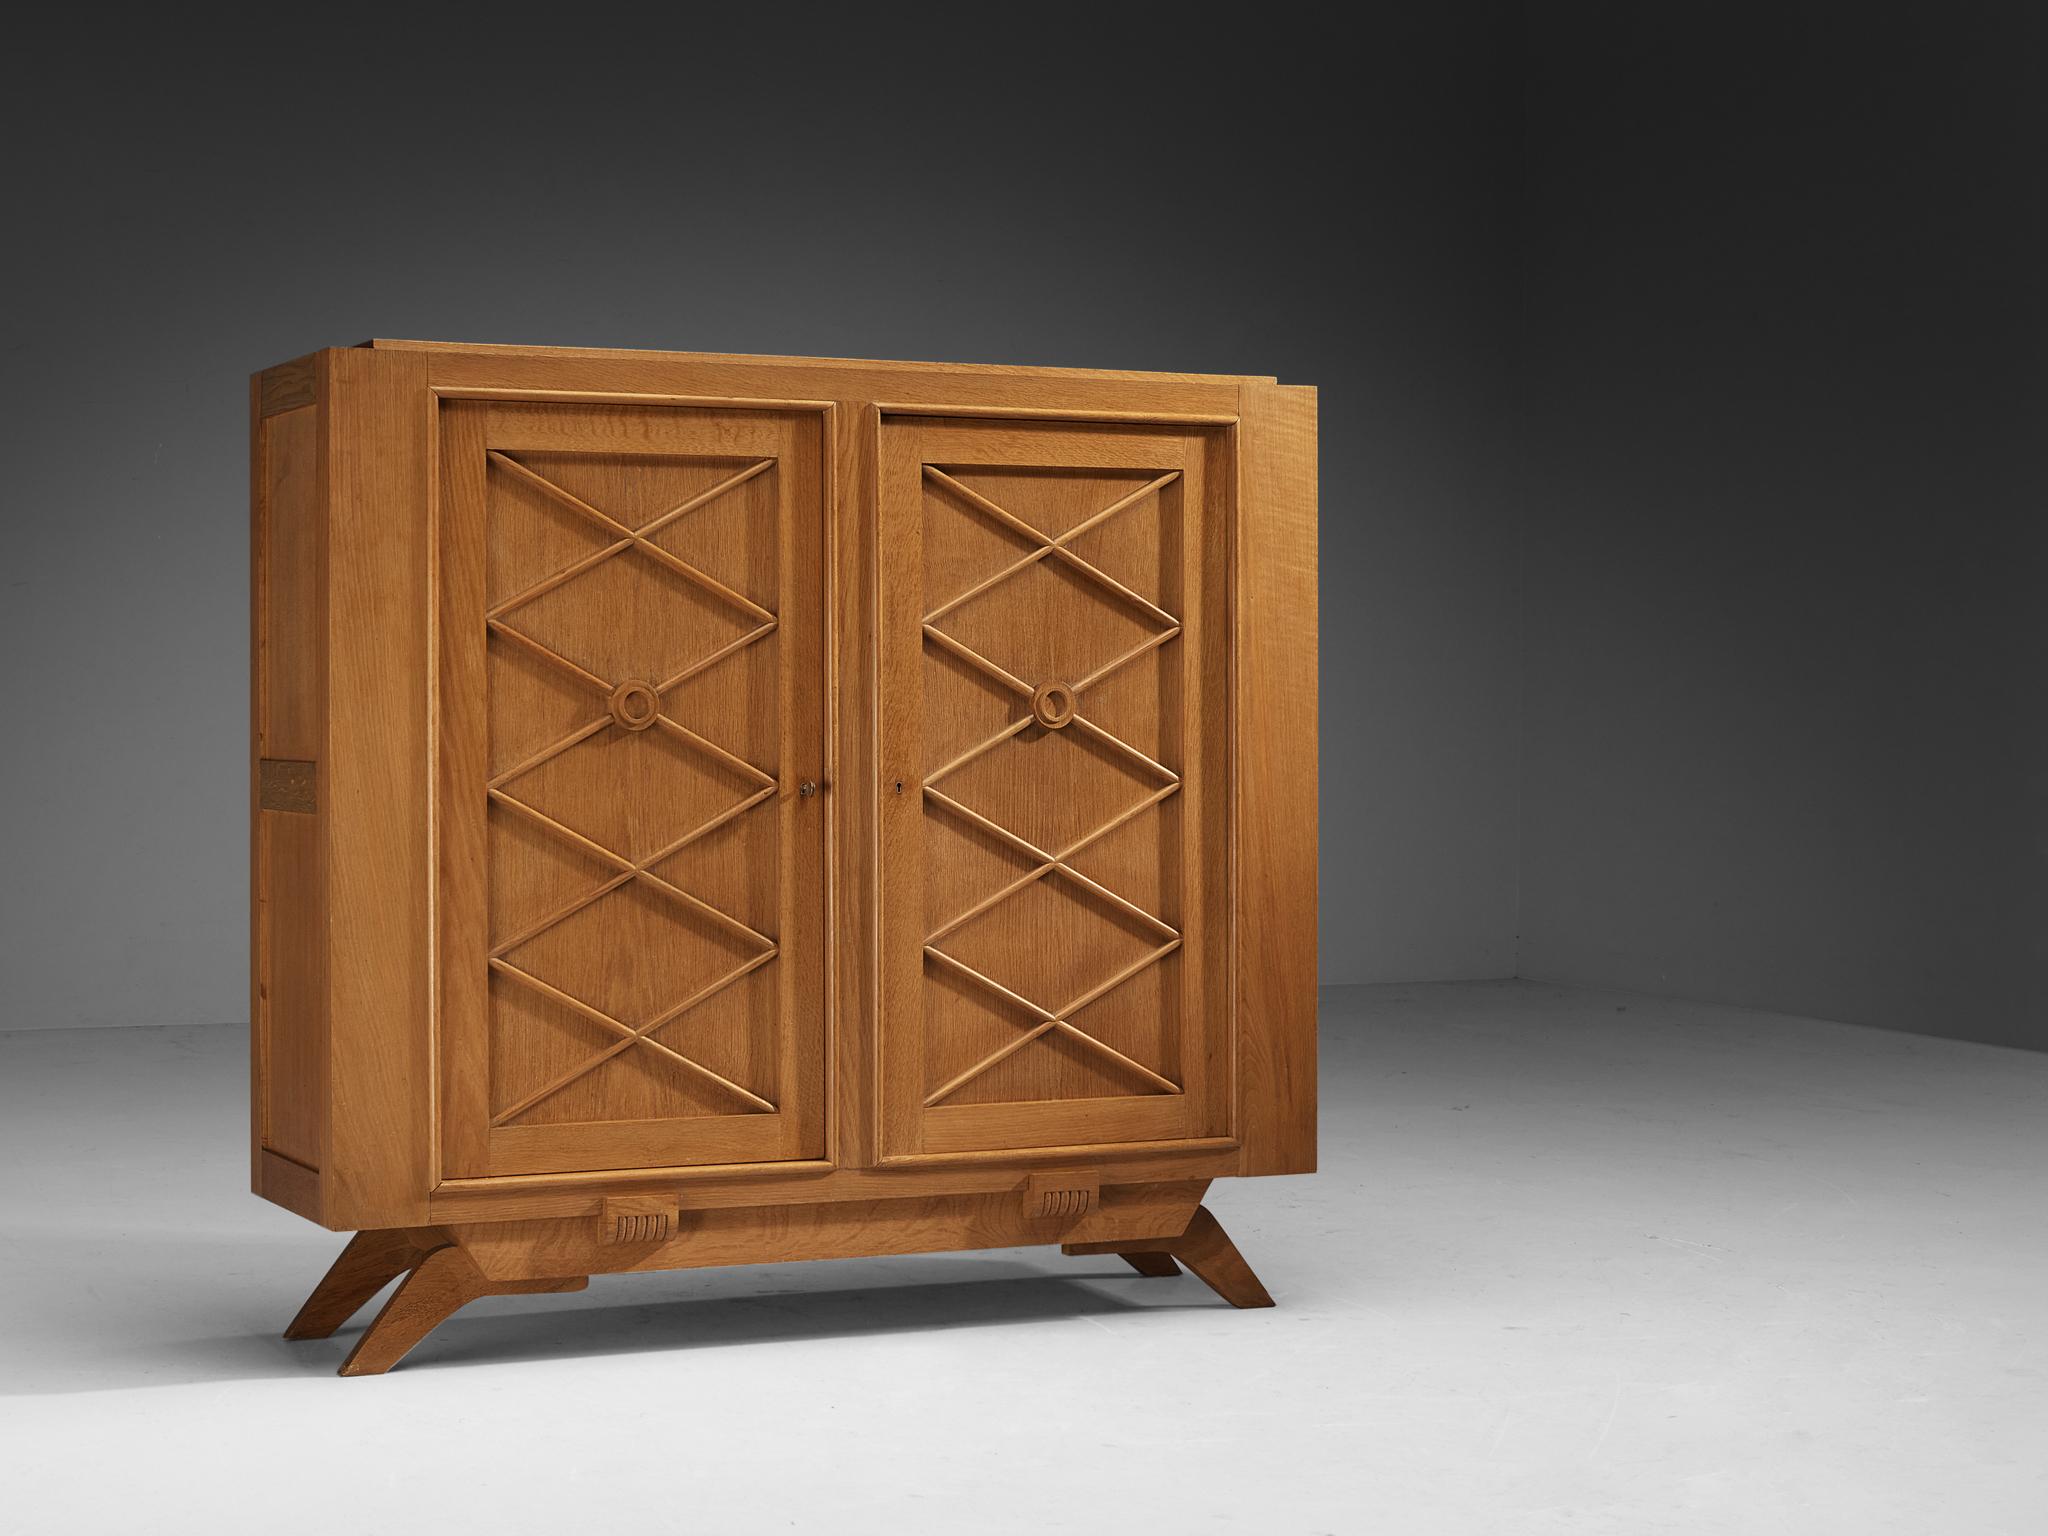 Cabinet, oak, France, 1940s

A charming cabinet made in a wonderfully colored oak. This piece of furniture has beautiful cross-patterned and circular oak inlays on the two doors. The base of this piece is very monumental but also elegant and